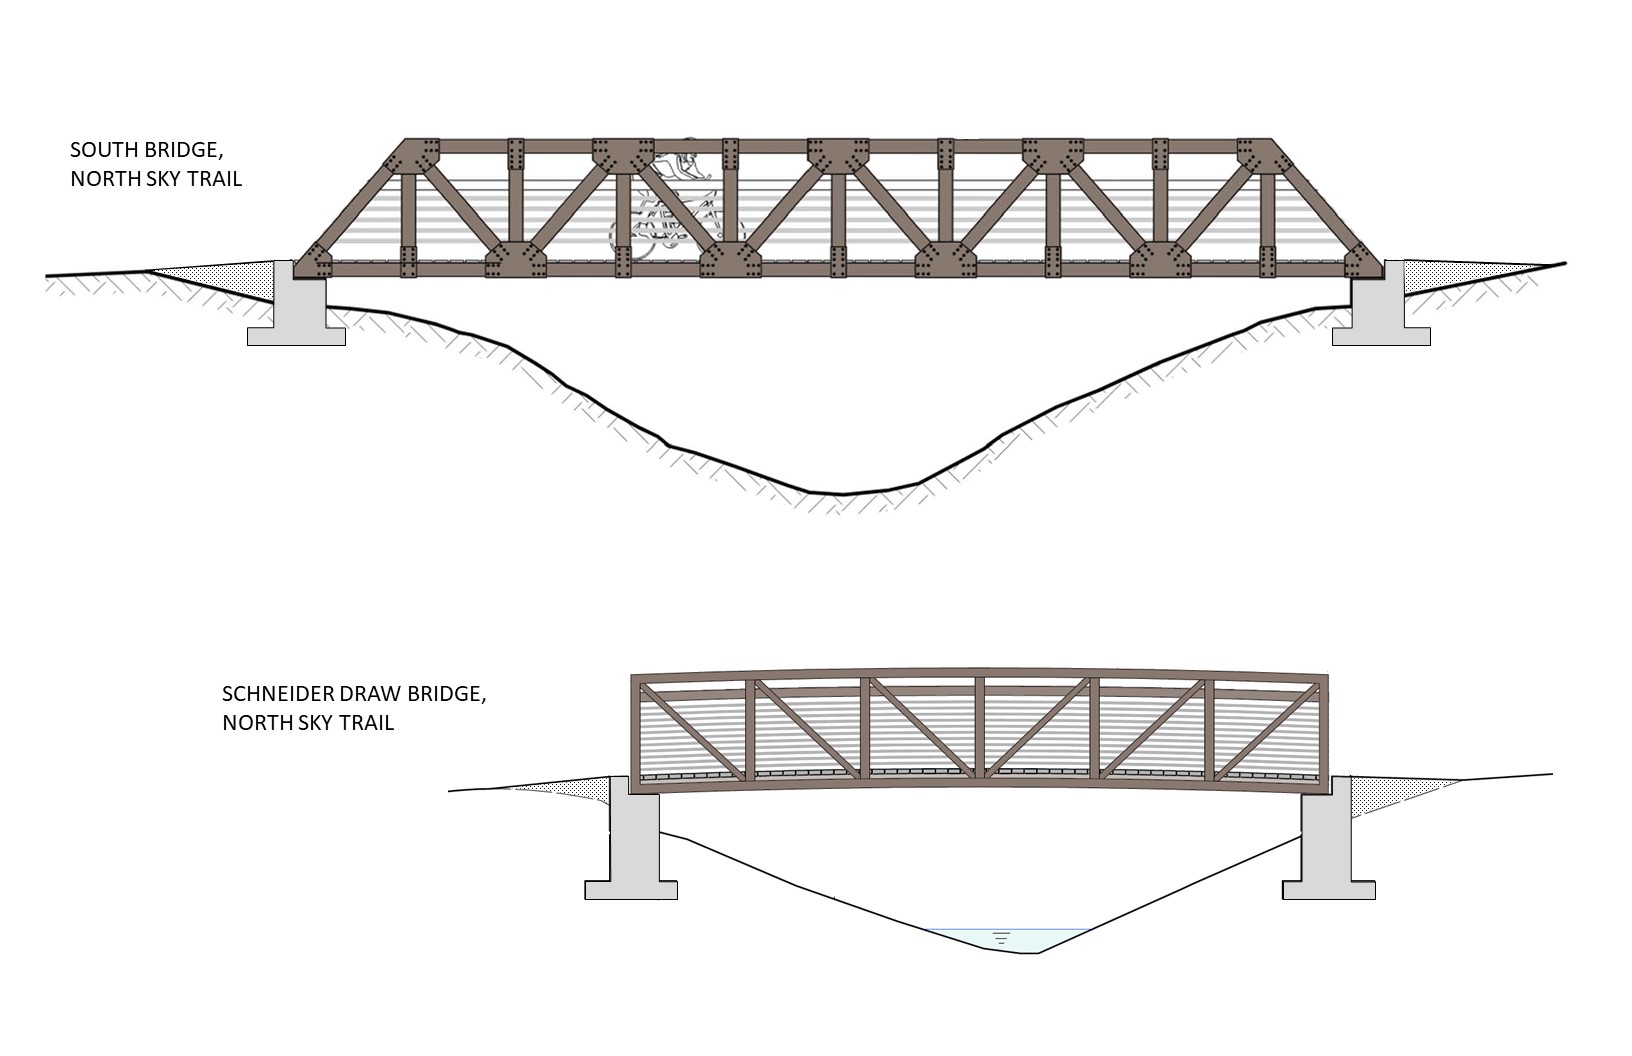 Design sketch of the North Sky Trail bridges that are being built